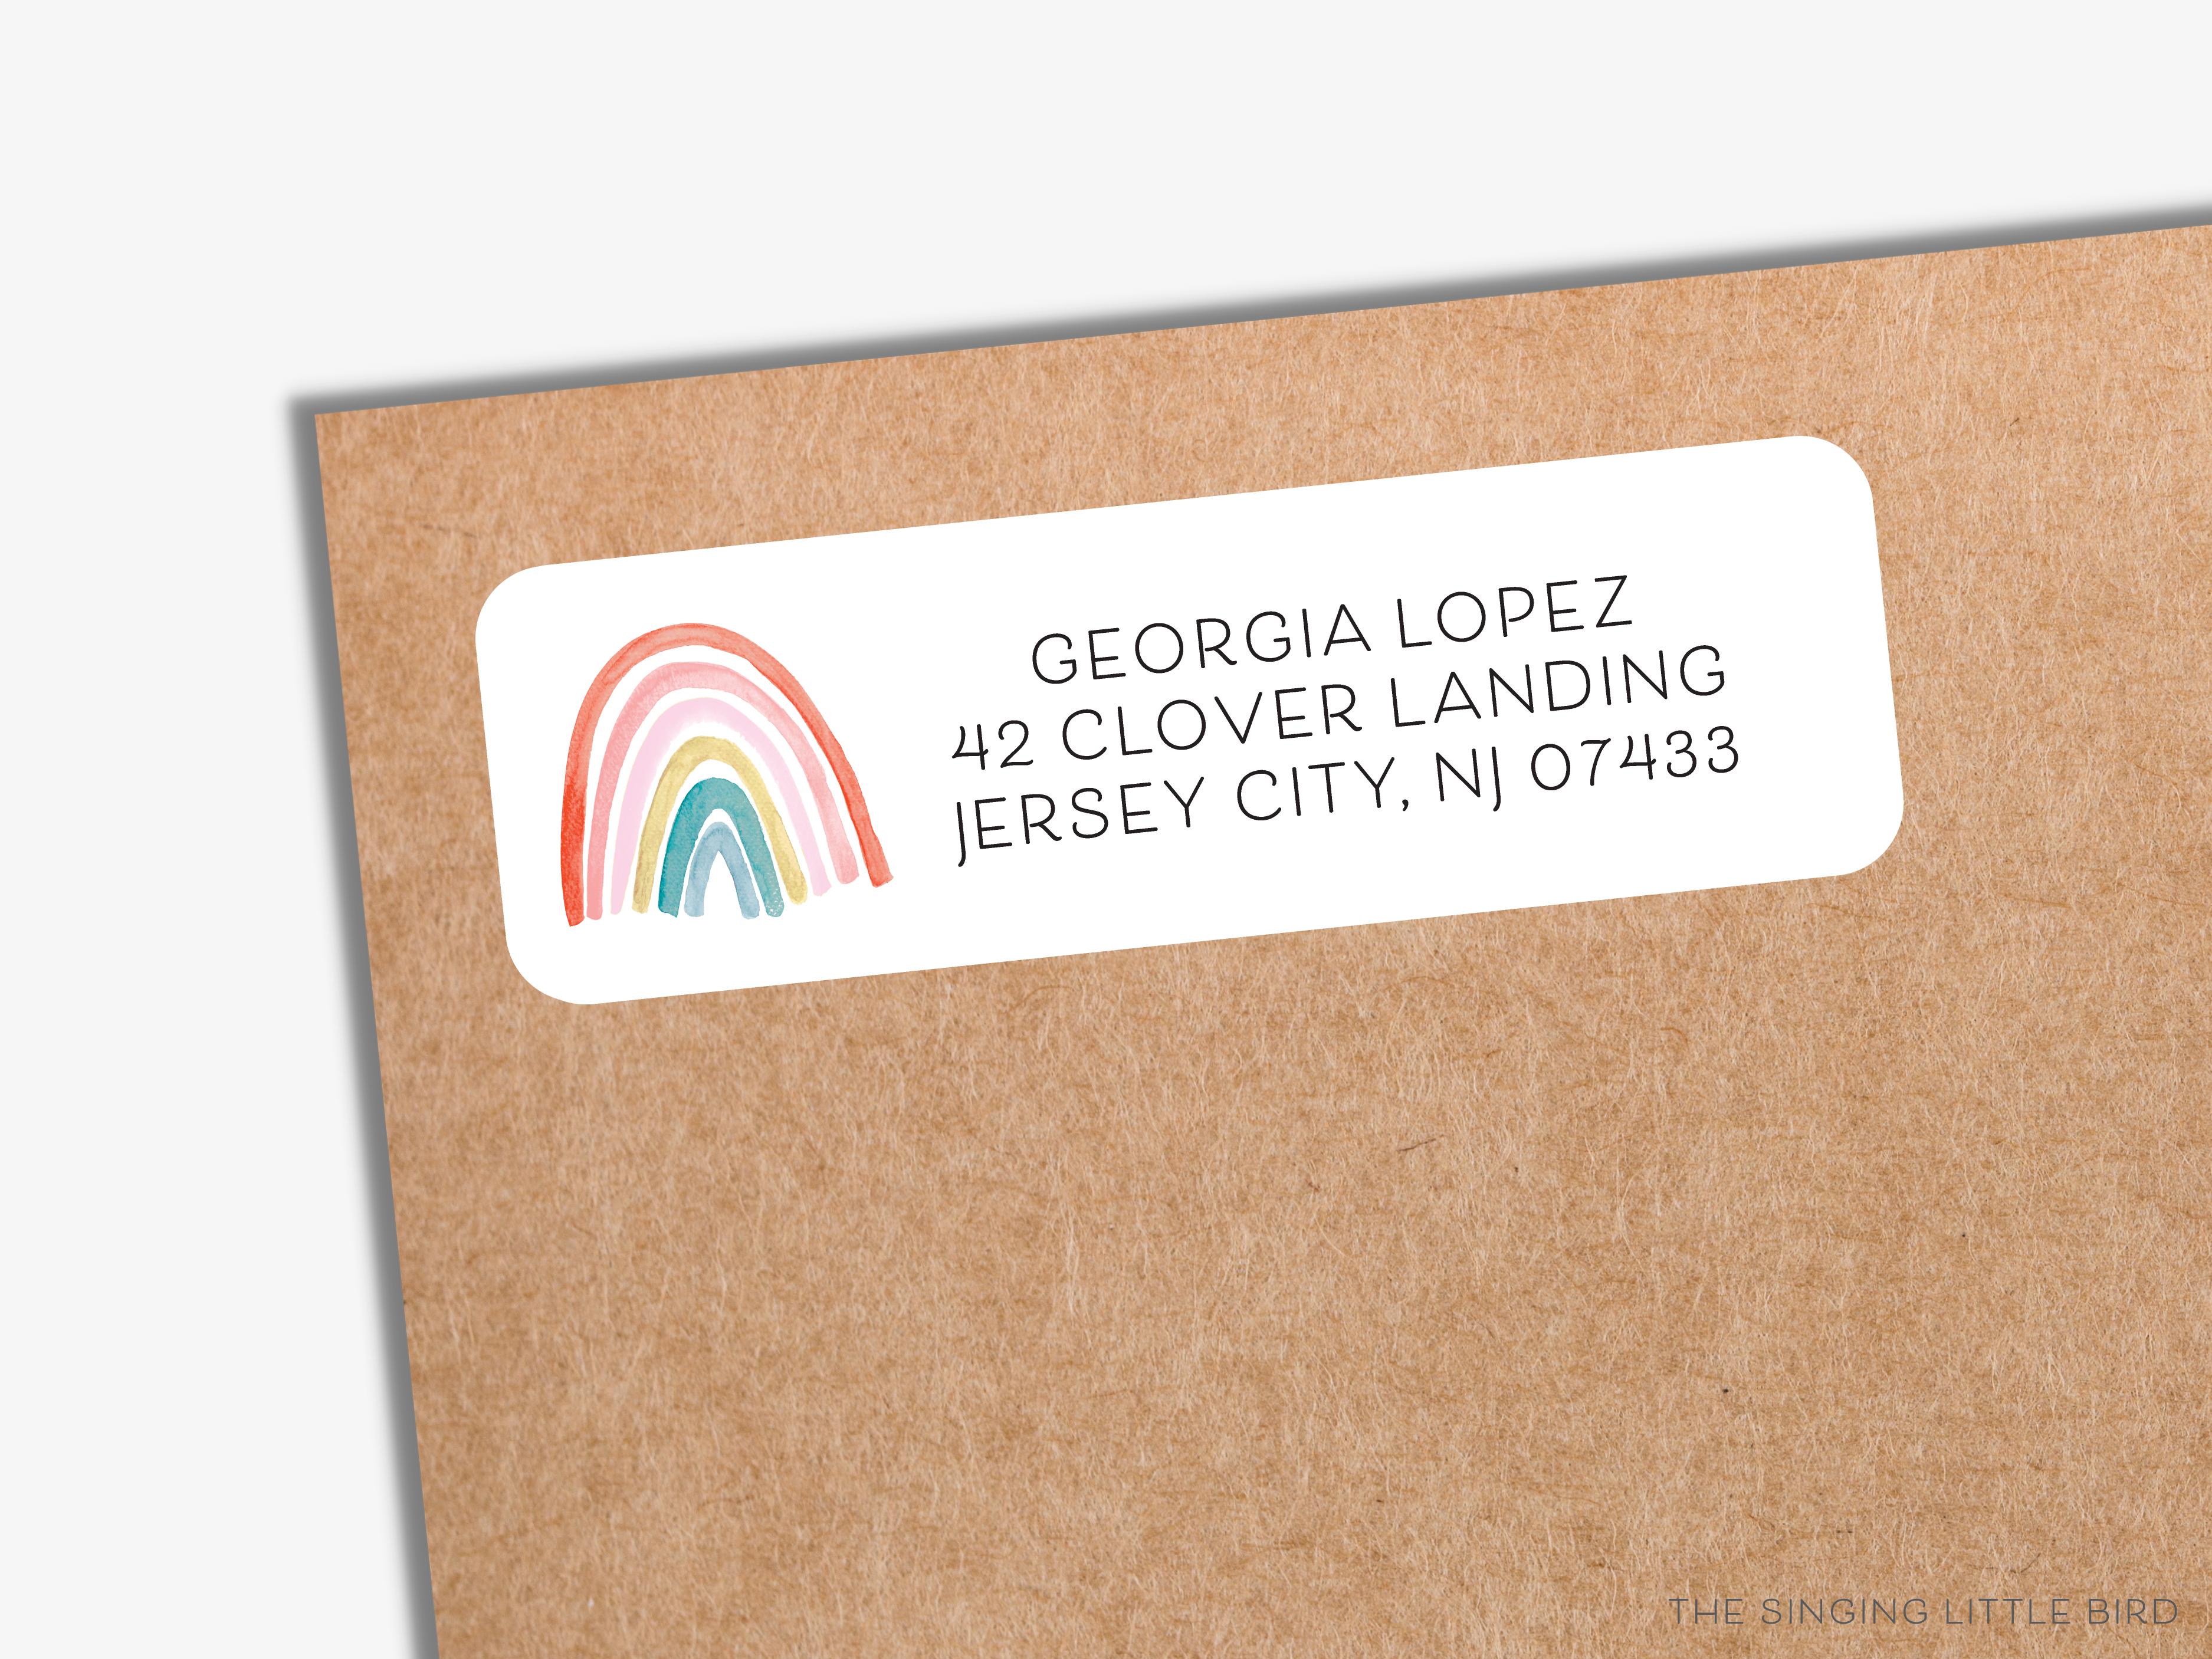 Boho Rainbow Return Address Labels-These personalized return address labels are 2.625" x 1" and feature our hand-painted watercolor Rainbow, printed in the USA on beautiful matte finish labels. These make great gifts for yourself or the rainbow lover.-The Singing Little Bird